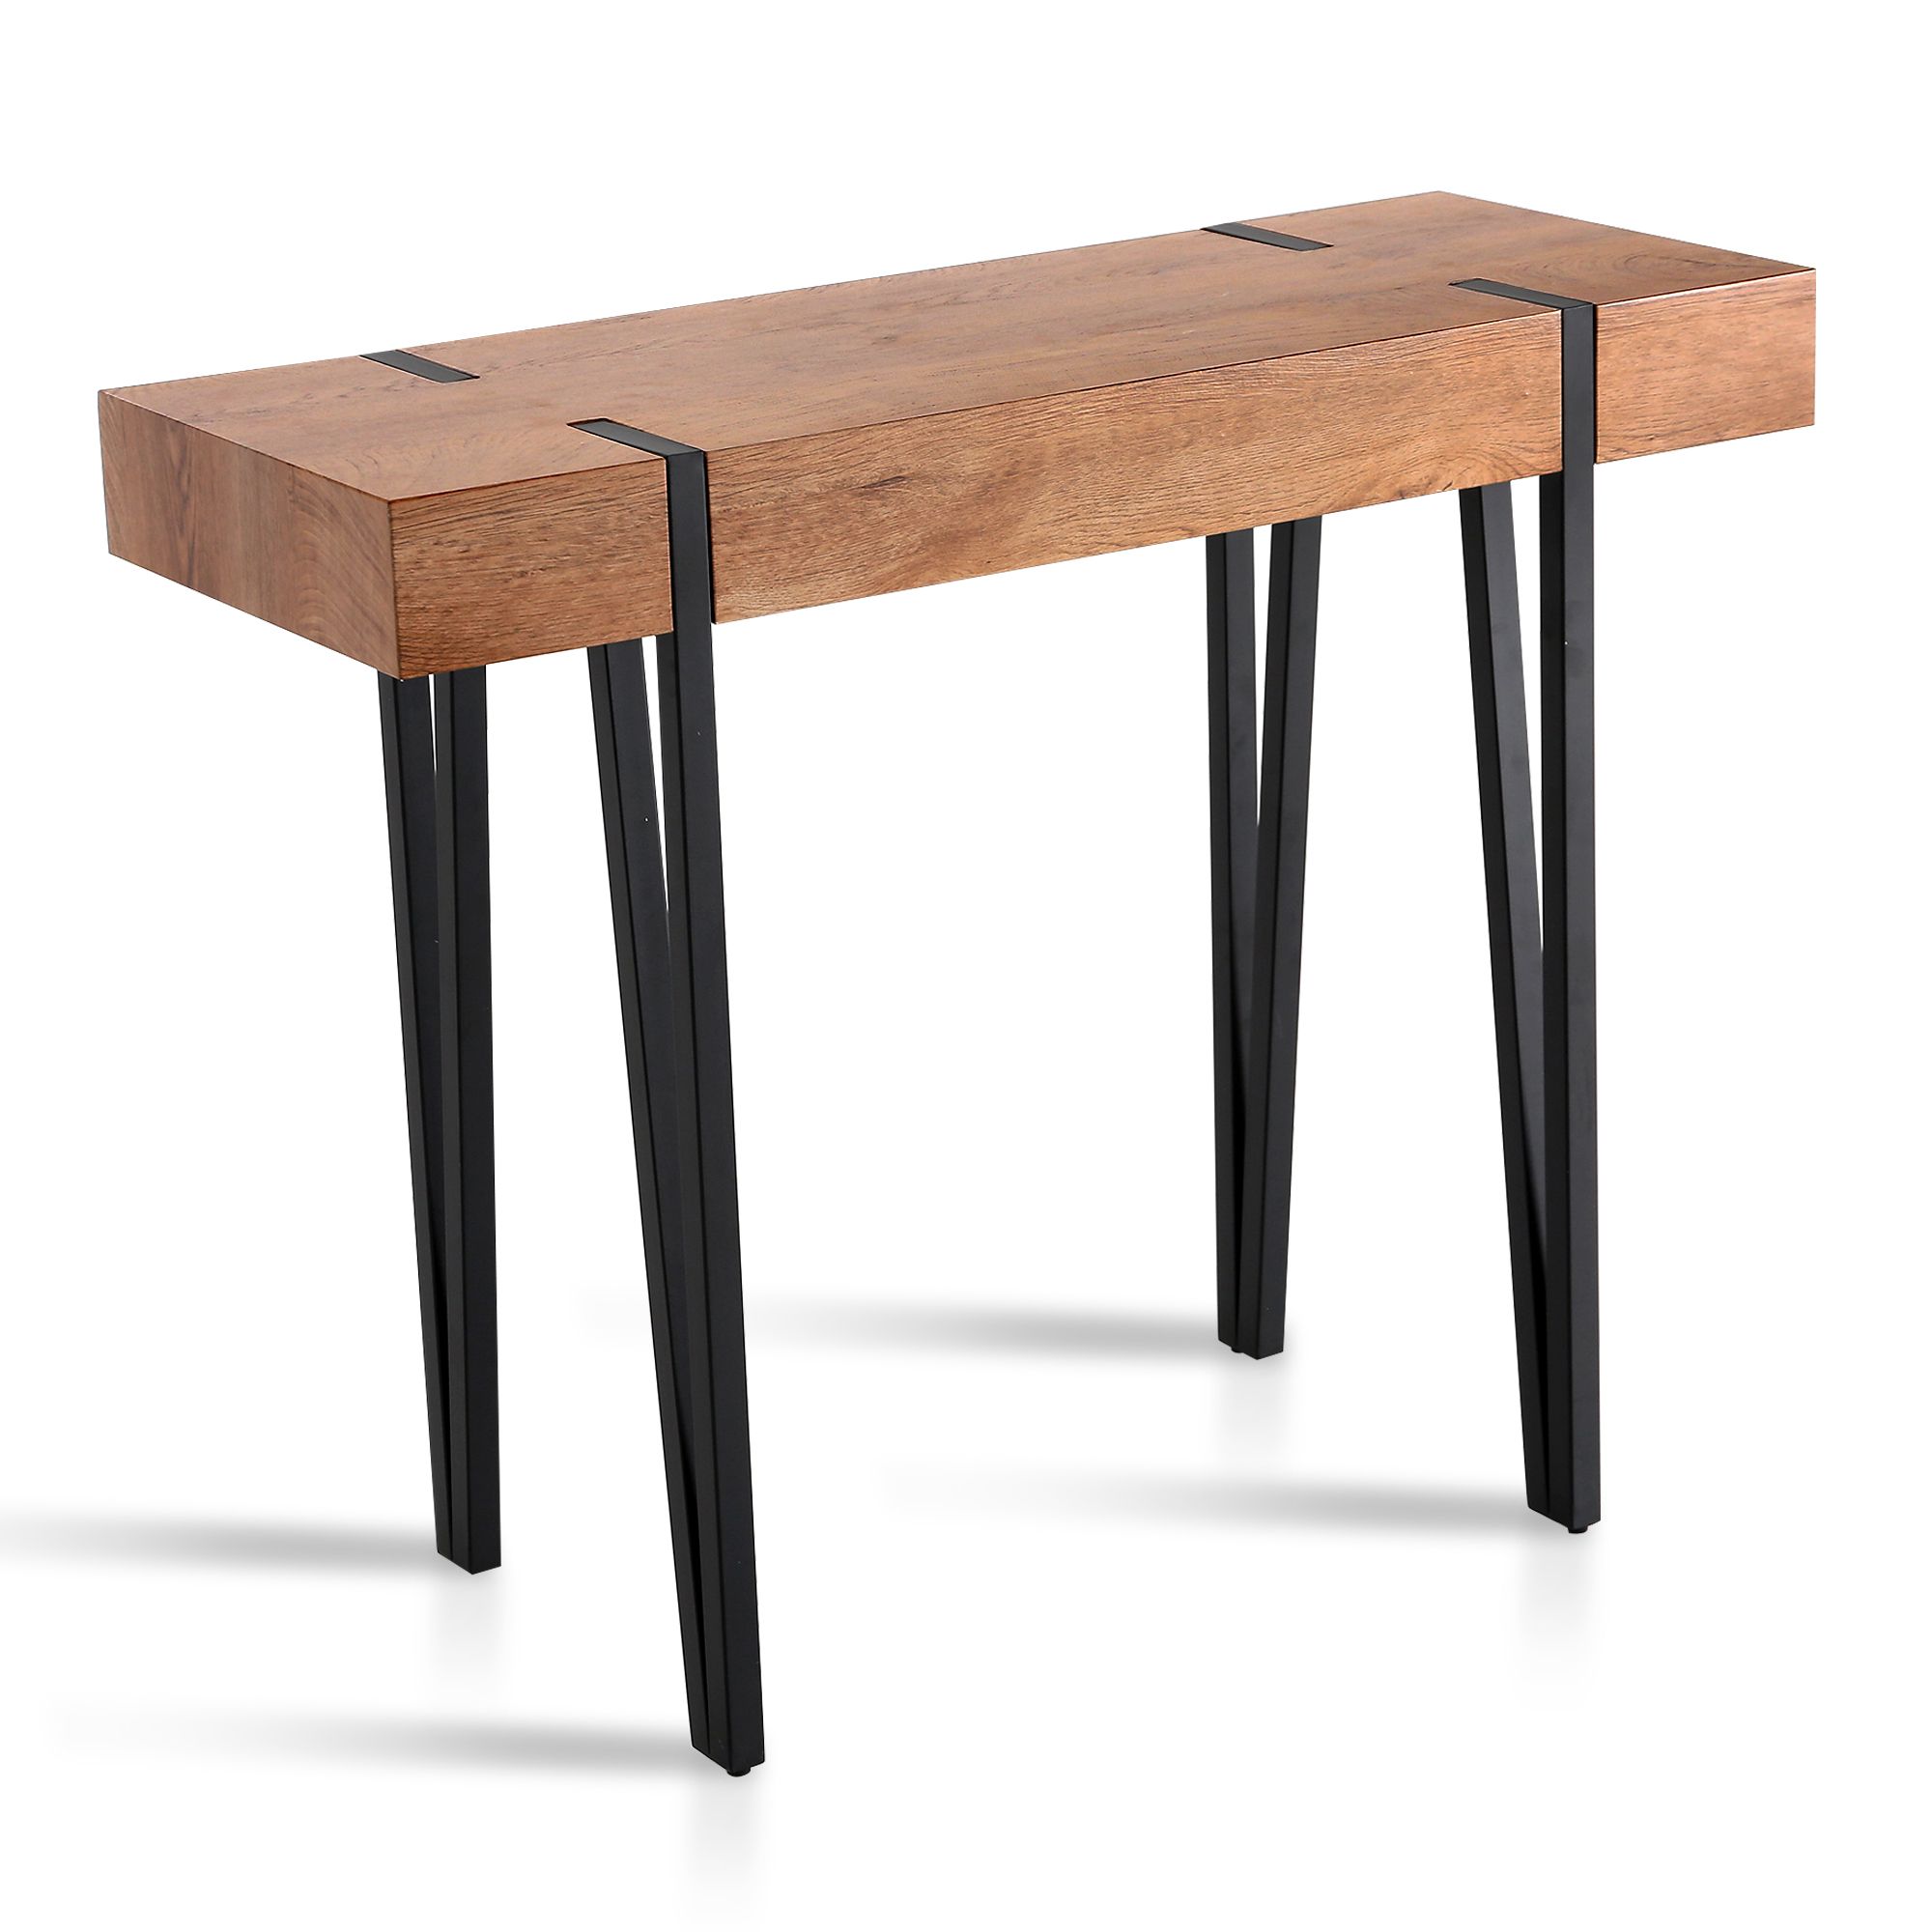 Mcombo Modern Industrial Console Table , Rustic And Modern Style Throughout Rustic Barnside Console Tables (View 17 of 20)